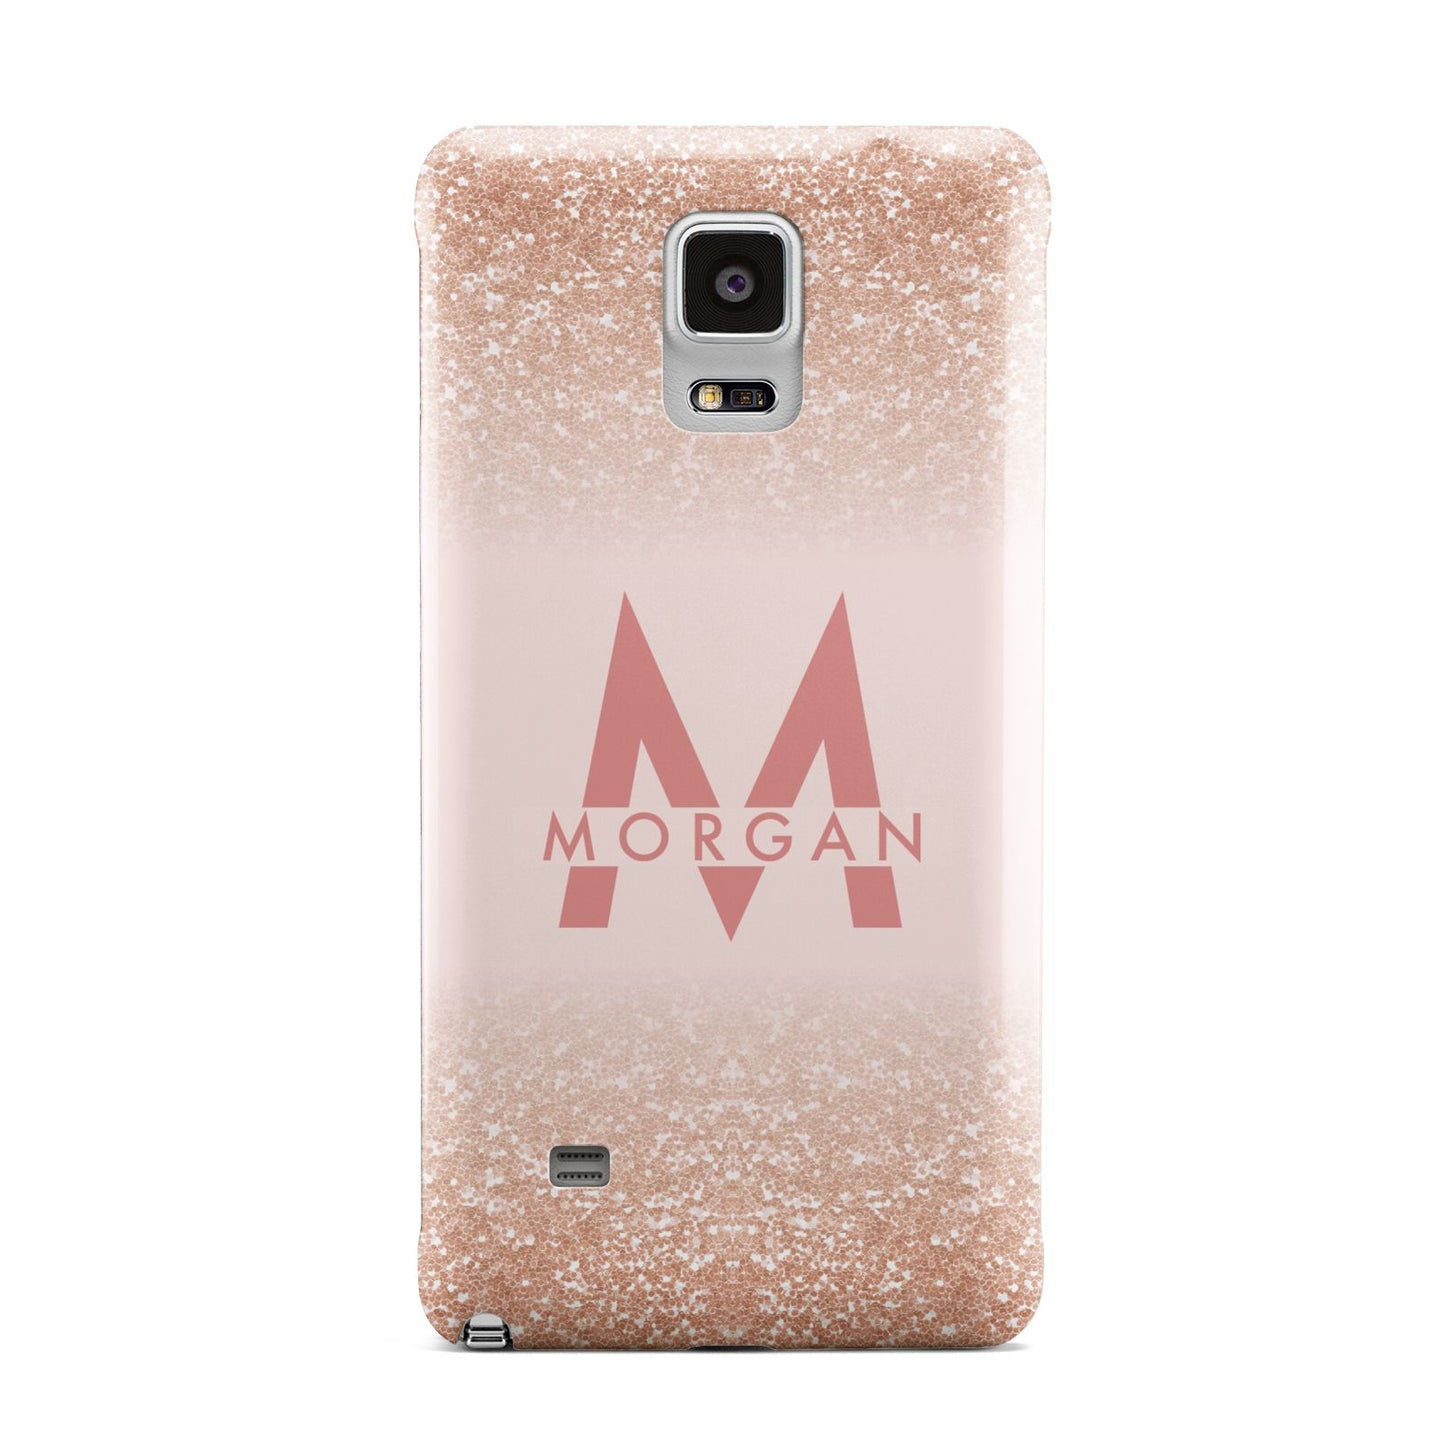 Personalised Printed Glitter Name Initials Samsung Galaxy Note 4 Case